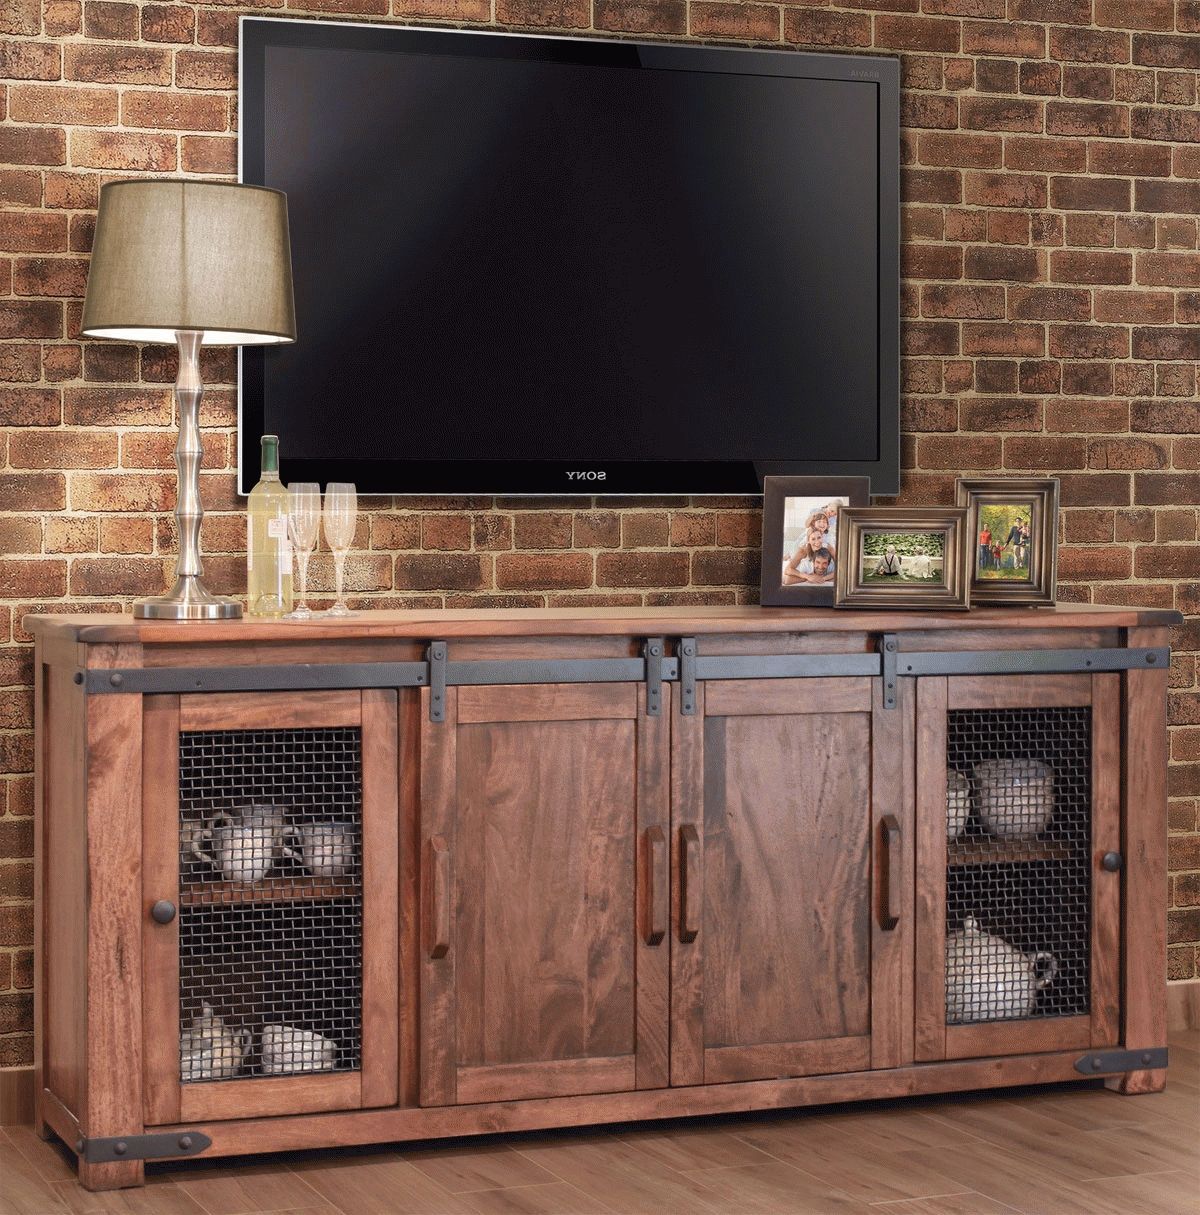 Rustic 70 Inch Tv Stand, 70 Inch Tv Stand, 70 Tv Stand Throughout Rustic Tv Stands For Sale (Gallery 1 of 20)